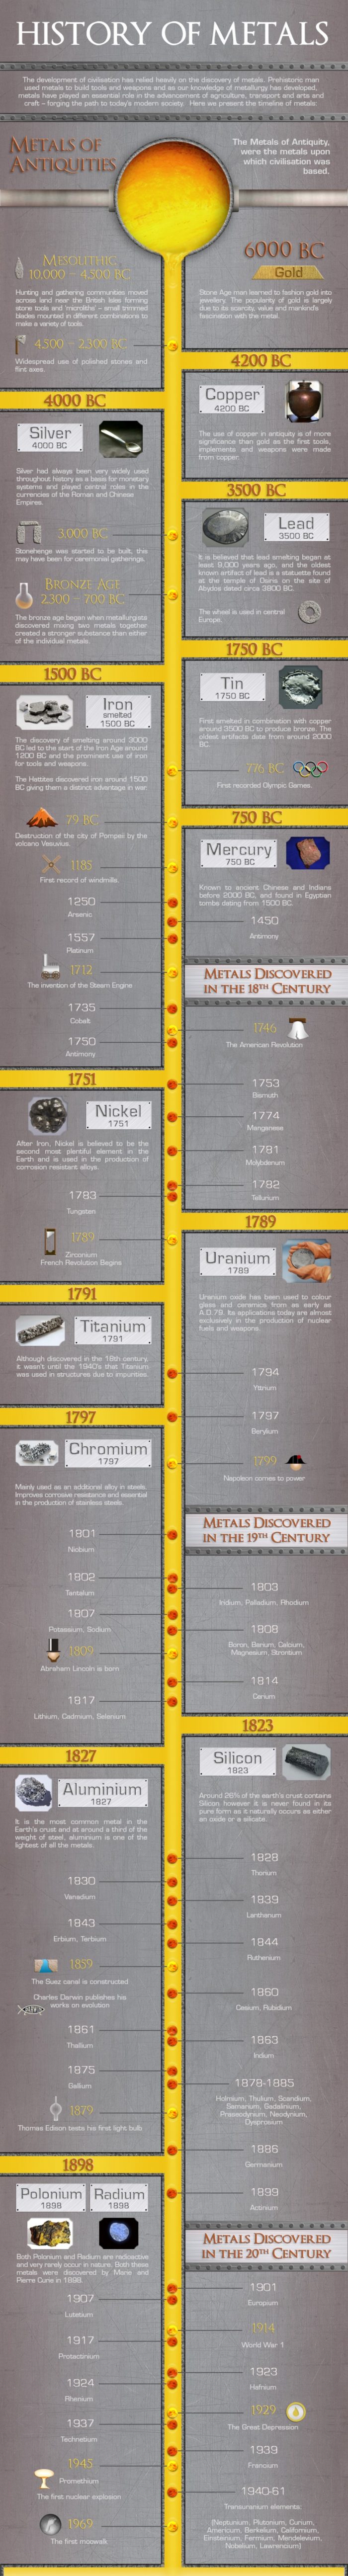 The History of Metals